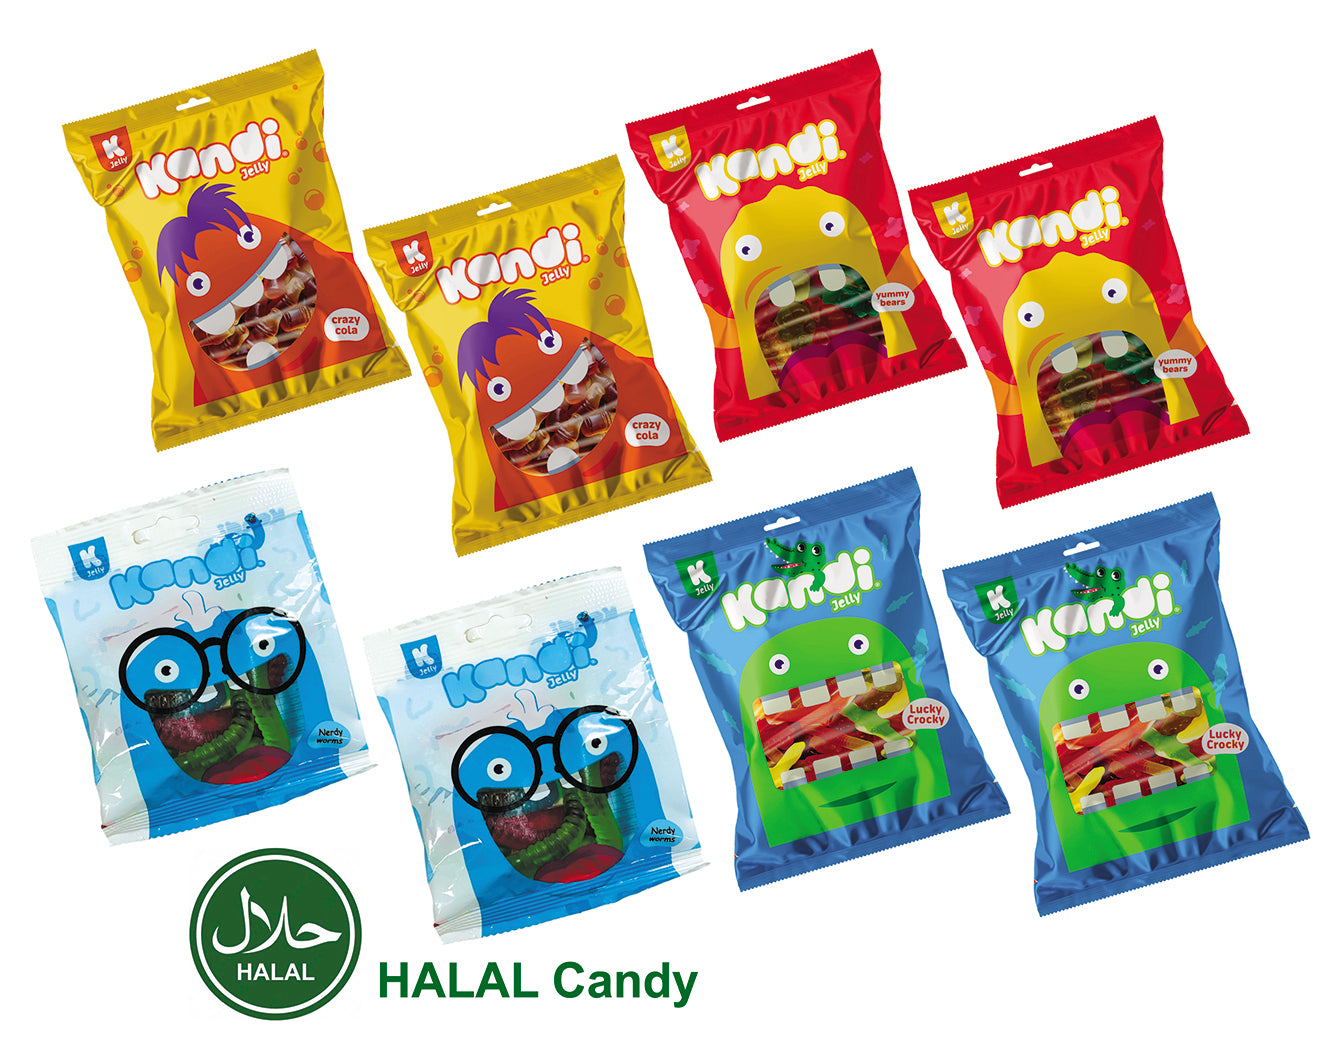 Halal Jelly Kandi | Authentic Egyptian Jelly Kandi | Set of 8 Bags (60g Each) - Total 480g (1.05 lbs) | 4 Exciting Flavors: (Crazy Cola, Yummy Bears, Lucky Crocky, Nerdy Worms) جيلي حلوى حلال